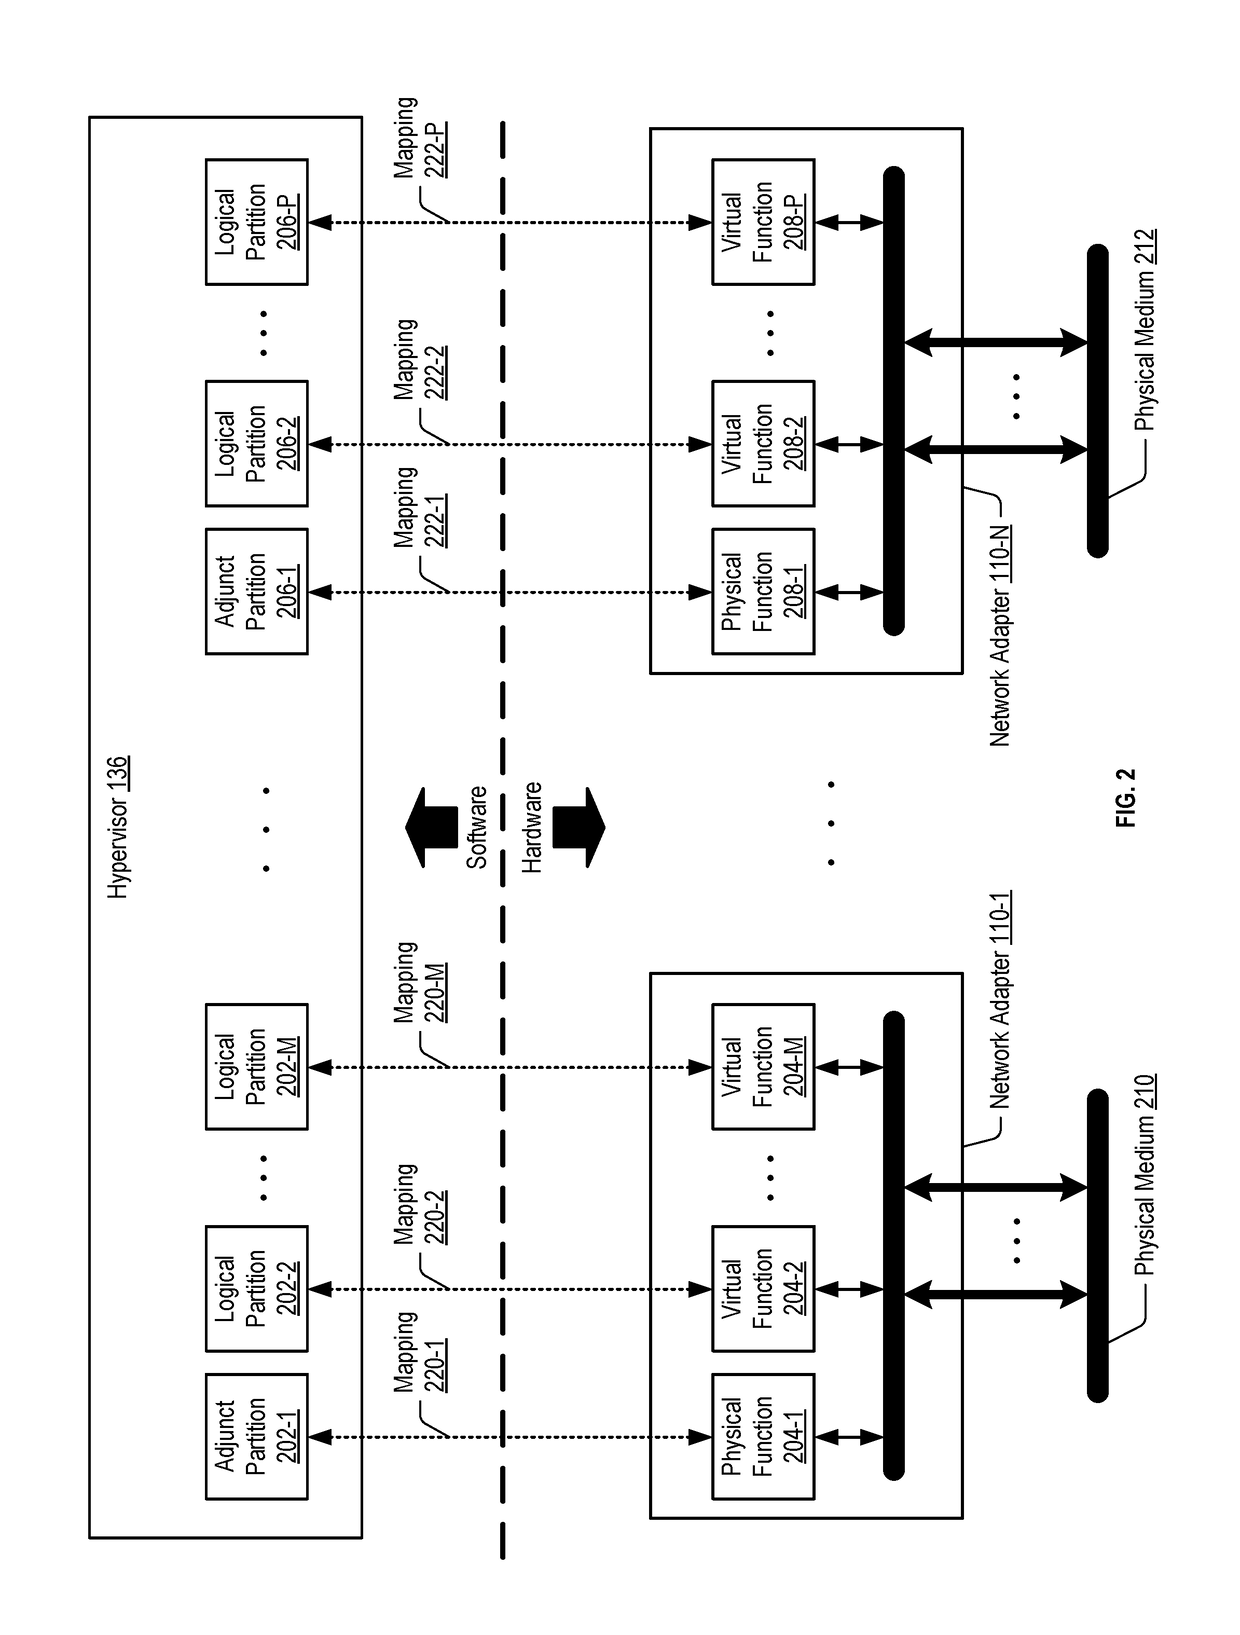 Migrating single root I/O virtualization adapter configurations in a computing system